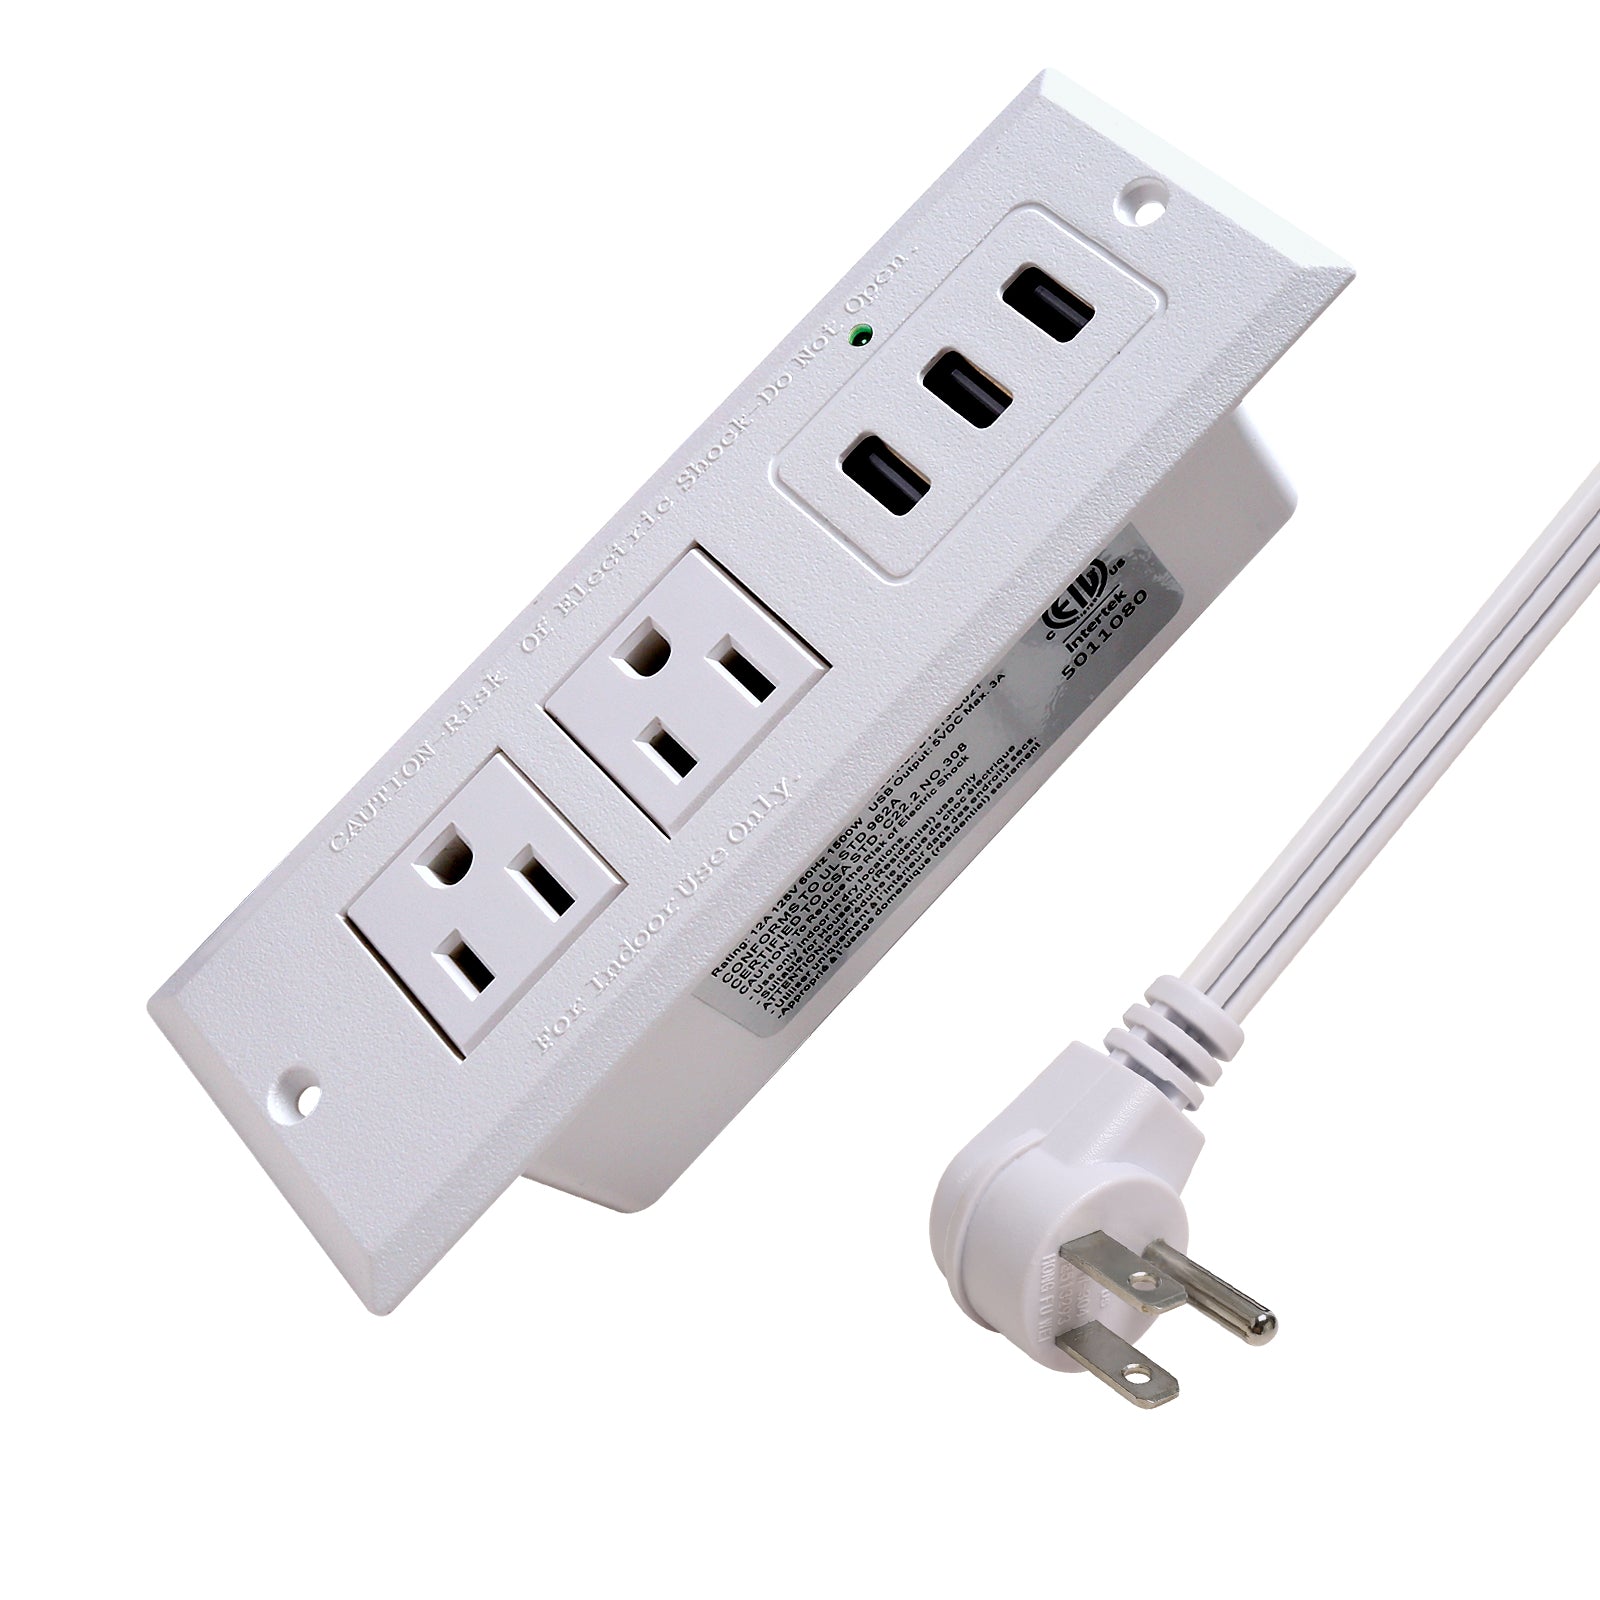 Desk Power Strip with USB Recessed Mounted Desktop Power Outlet 2 Outlets 3 USB Ports (15W/3A) White